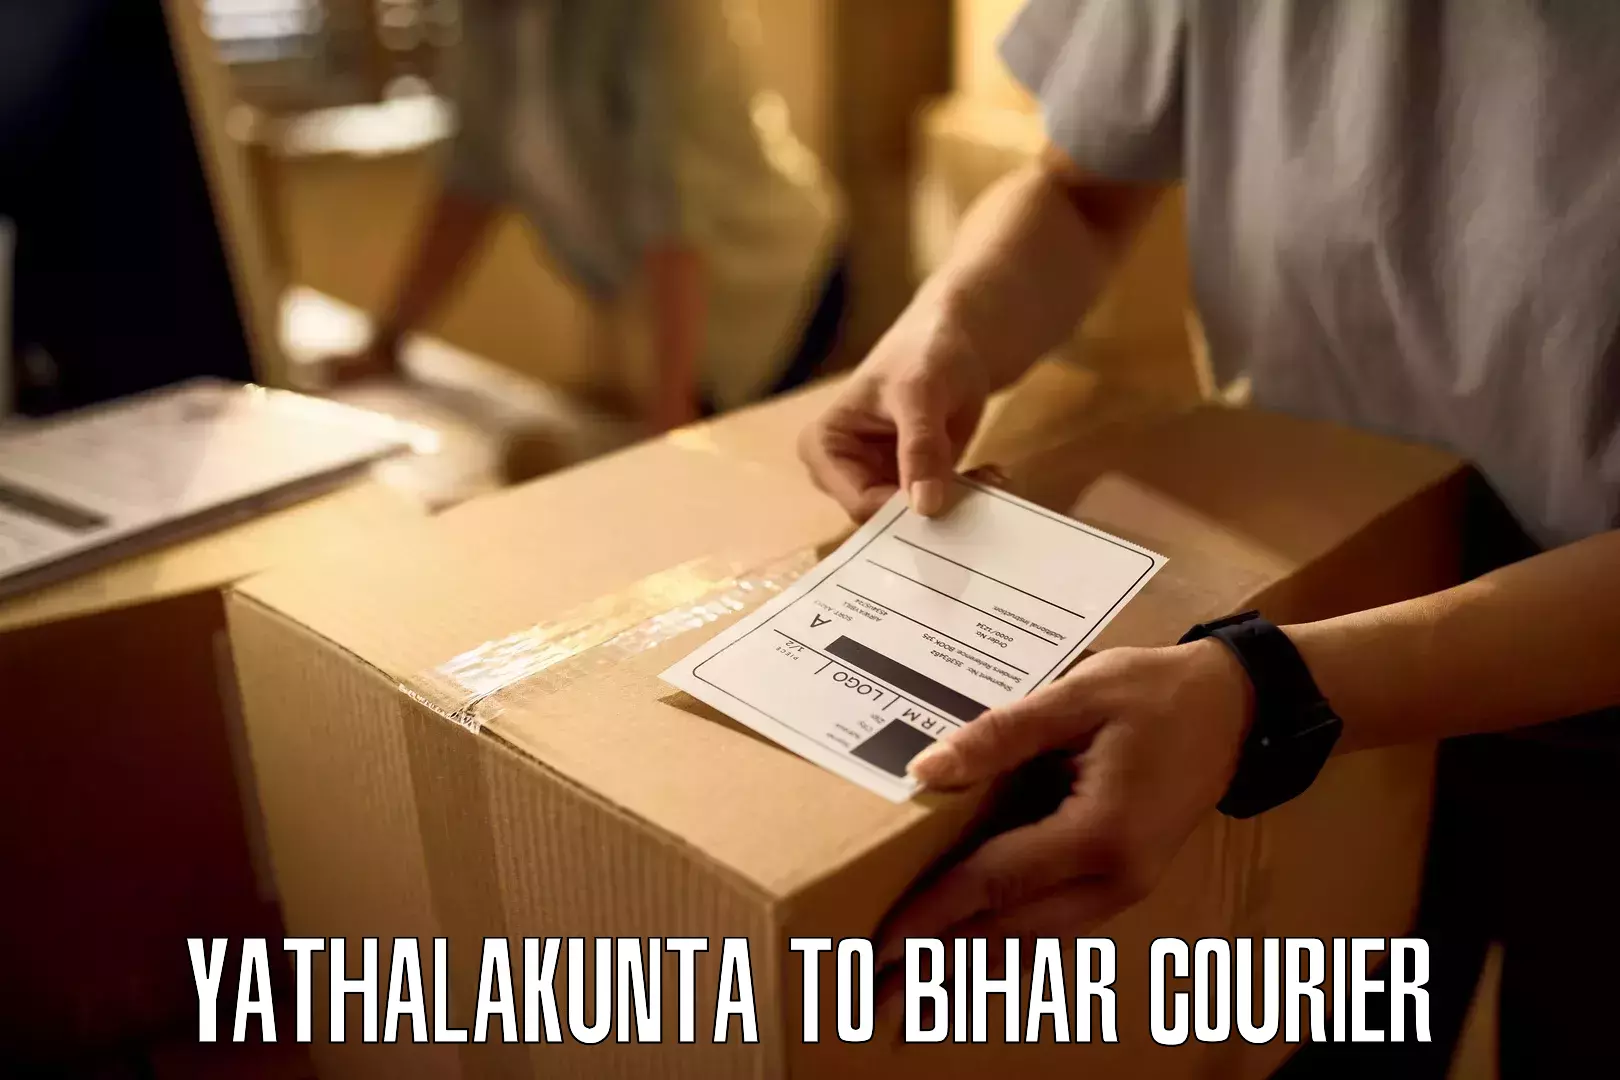 Courier service comparison Yathalakunta to Barh